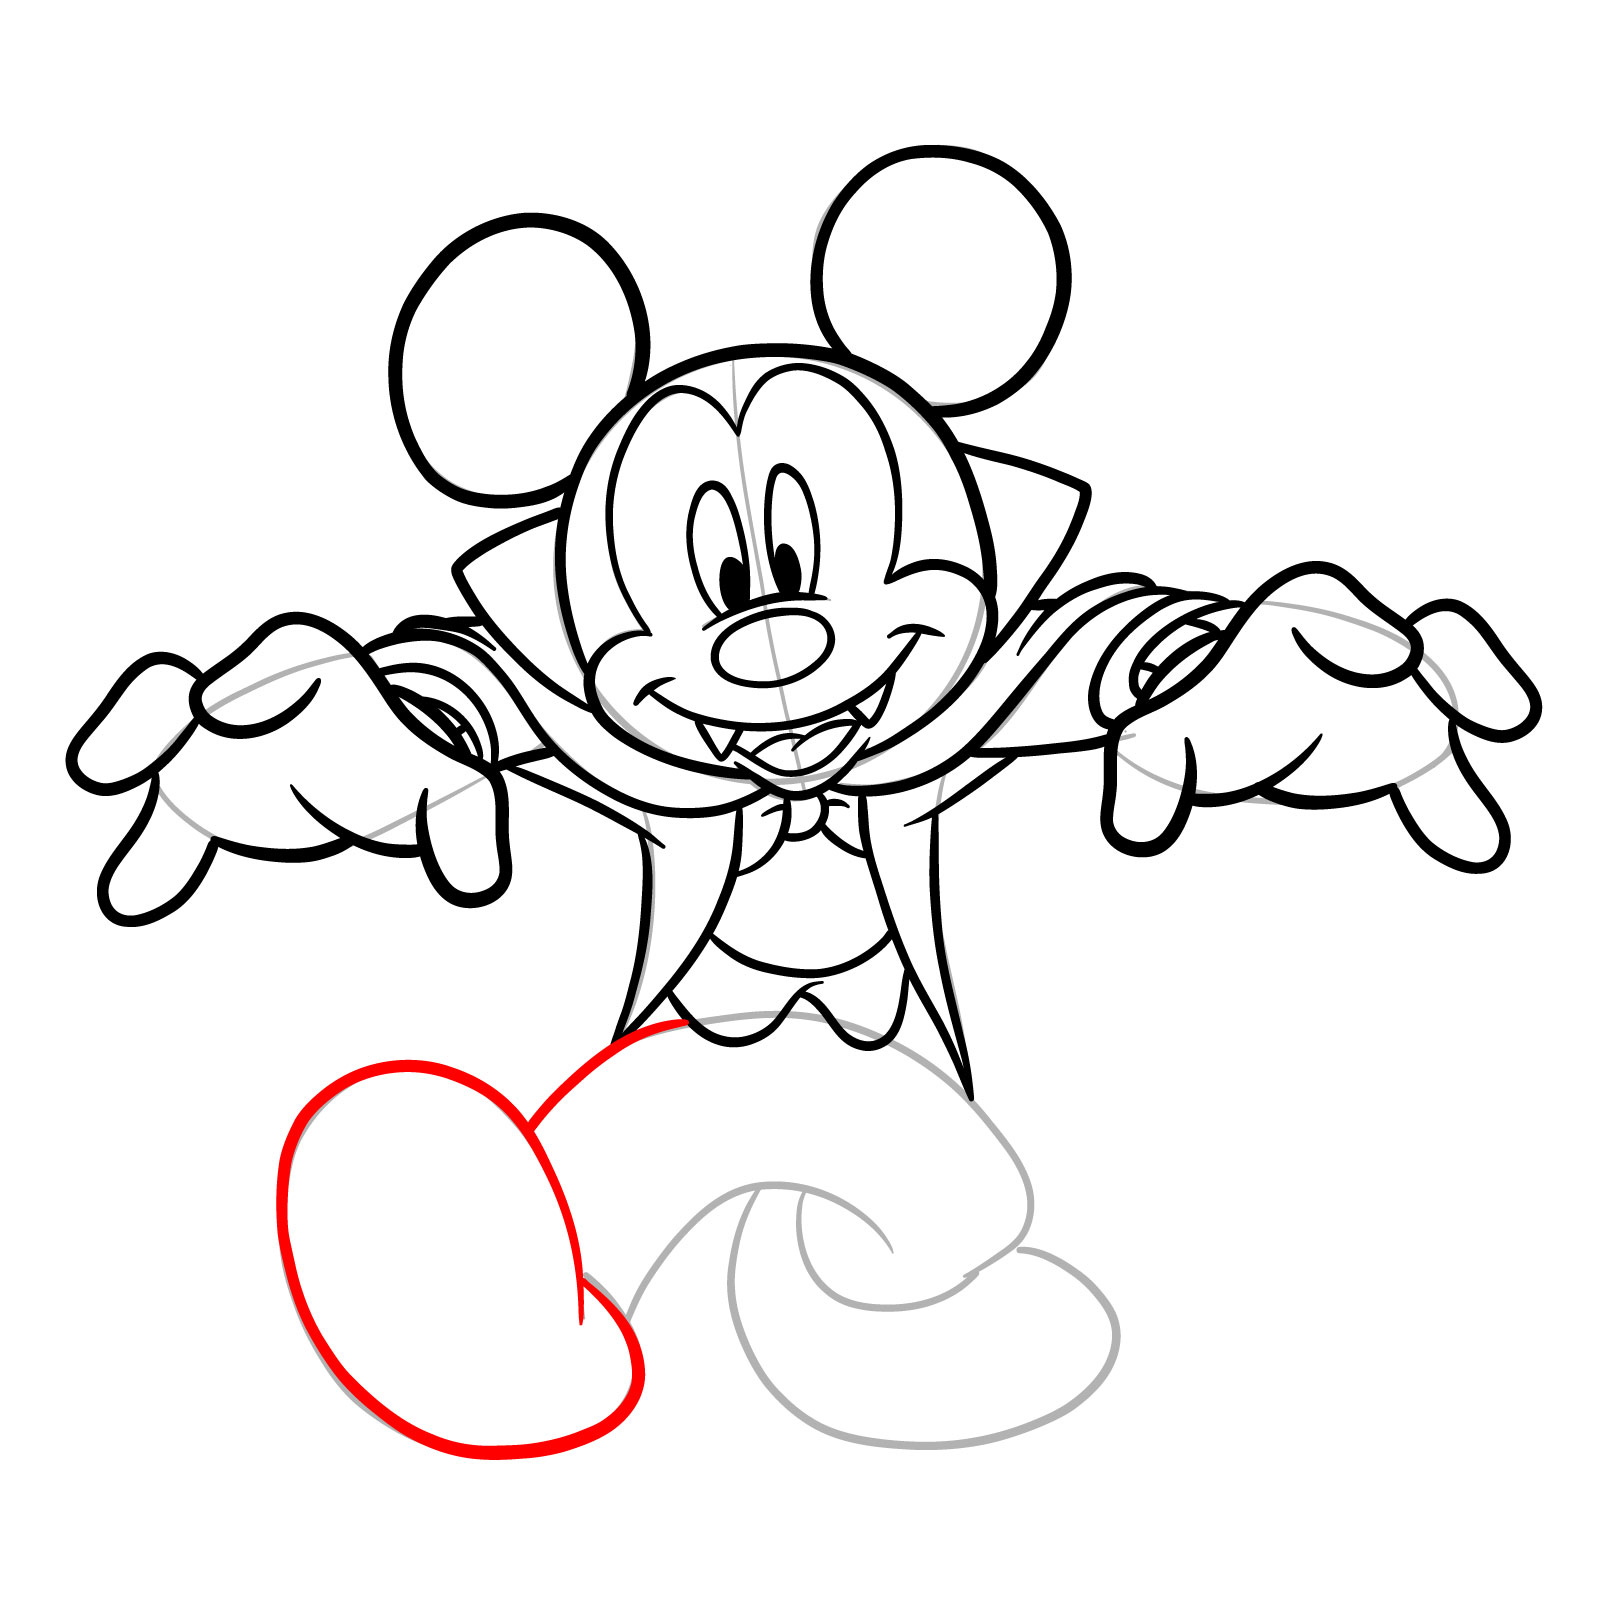 How to draw Dracula Mickey Mouse - step 21